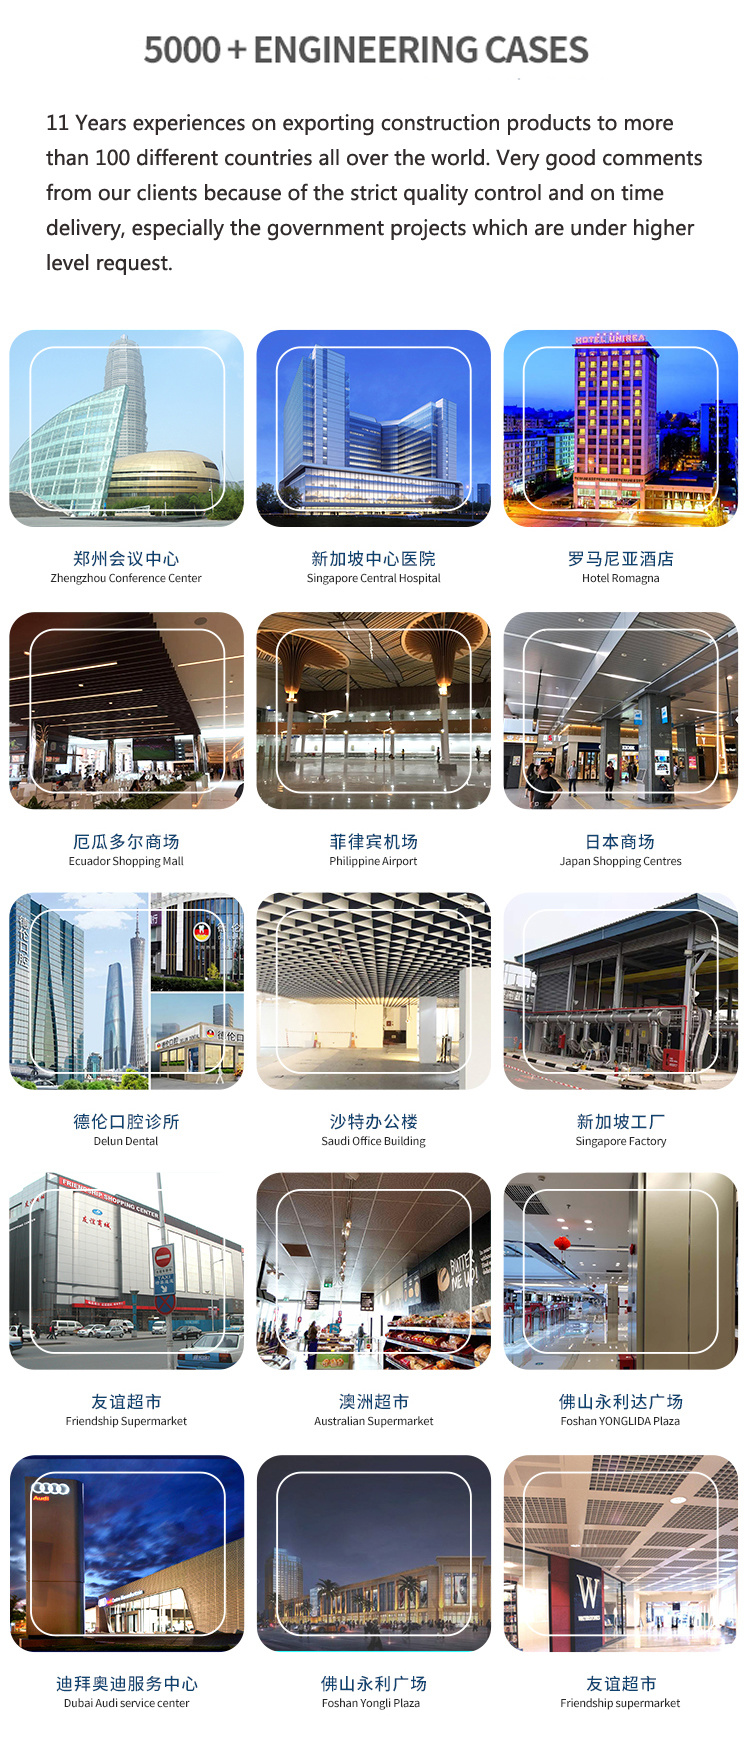 Linear Aluminum Outdoor Ceiling Panel Metal Strip Ceiling Panel